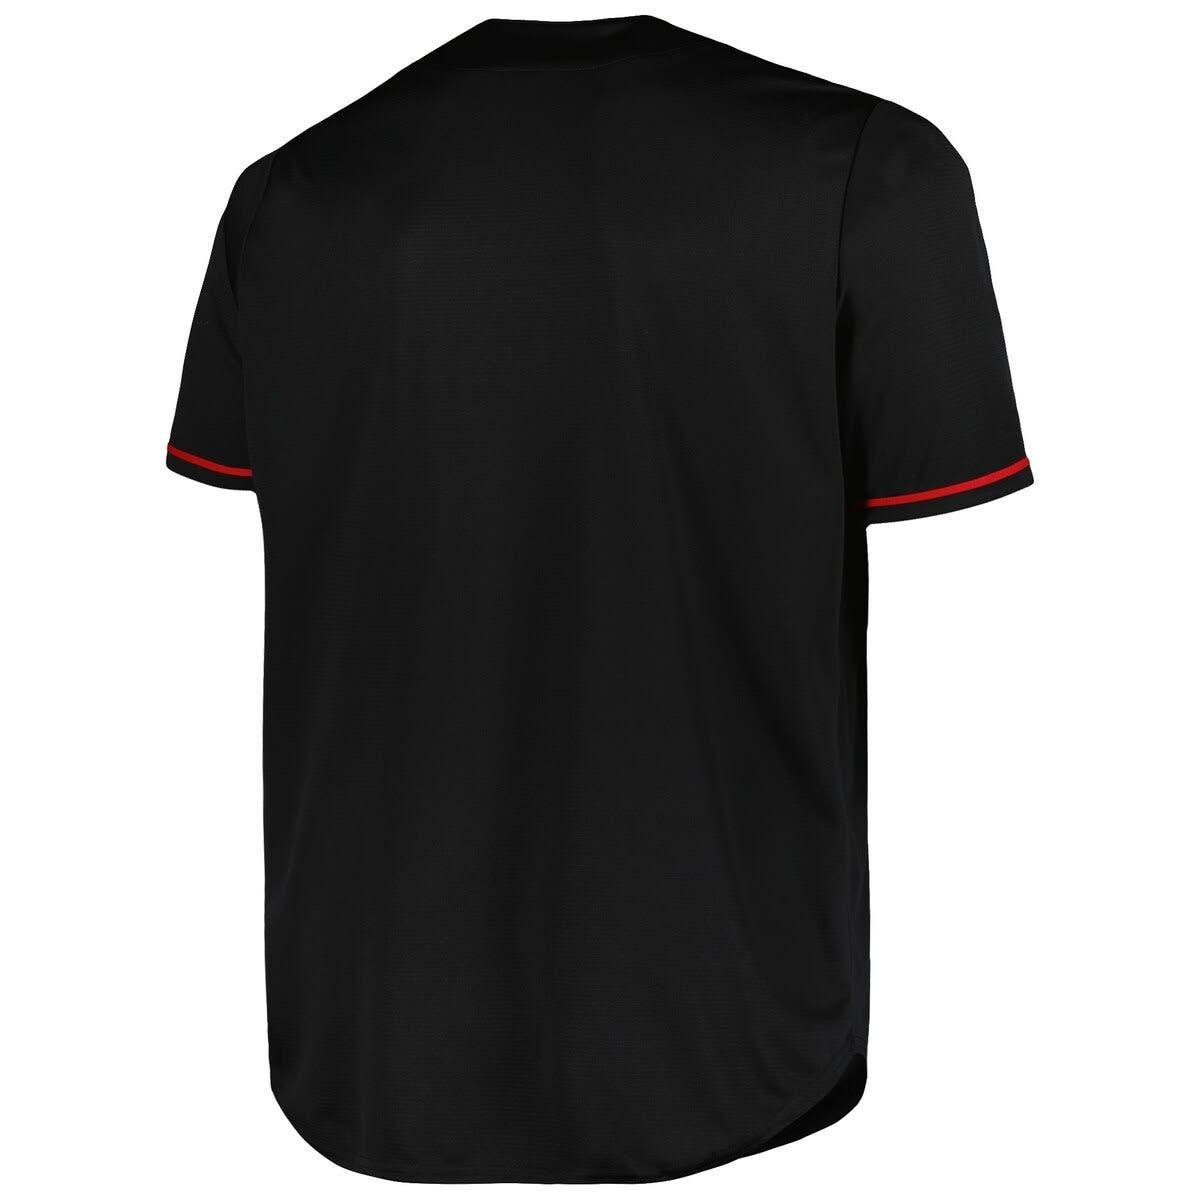 Profile St. Louis Cardinals Big & Tall Blackout Replica Jersey At Nordstrom  for Men